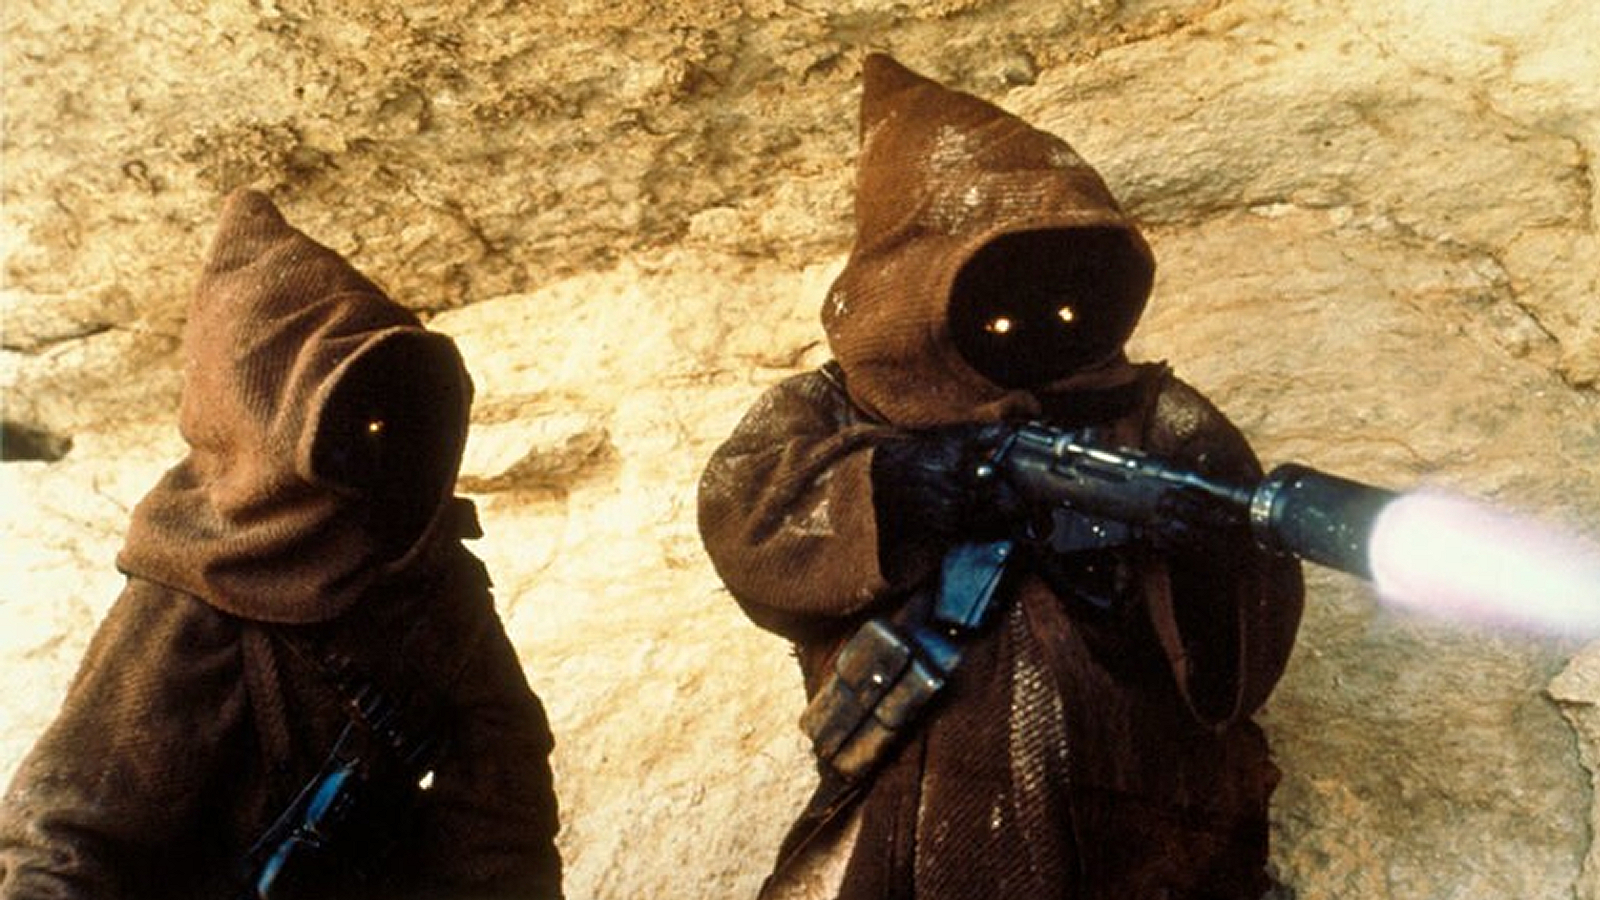 Two Jawas on Tatooine in Star Wars: A New Hope